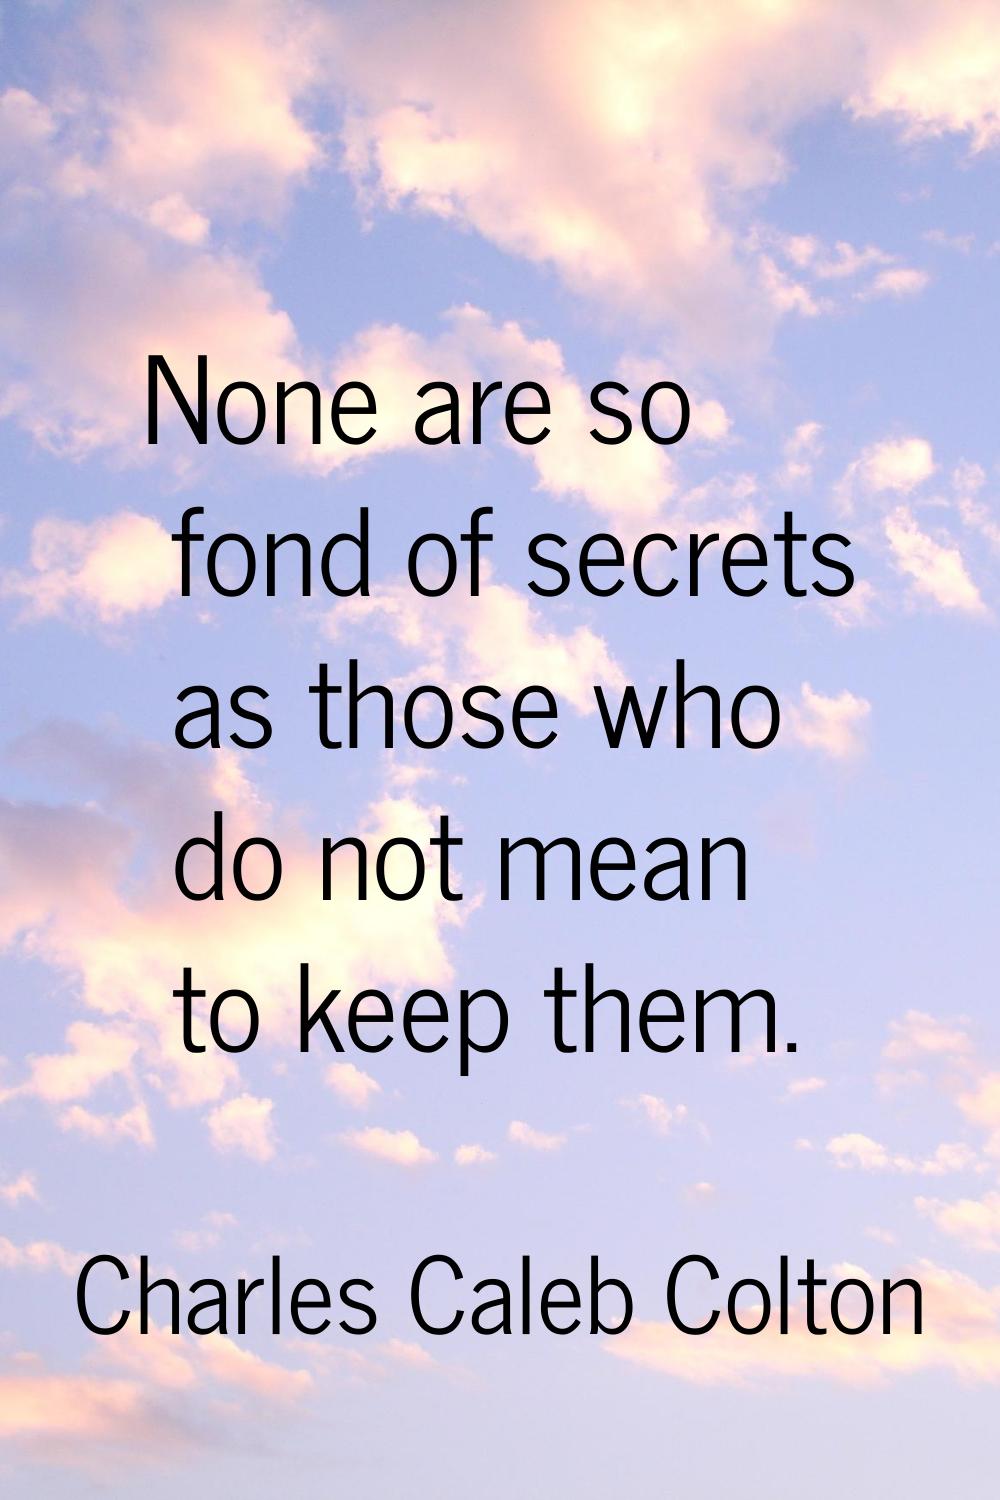 None are so fond of secrets as those who do not mean to keep them.